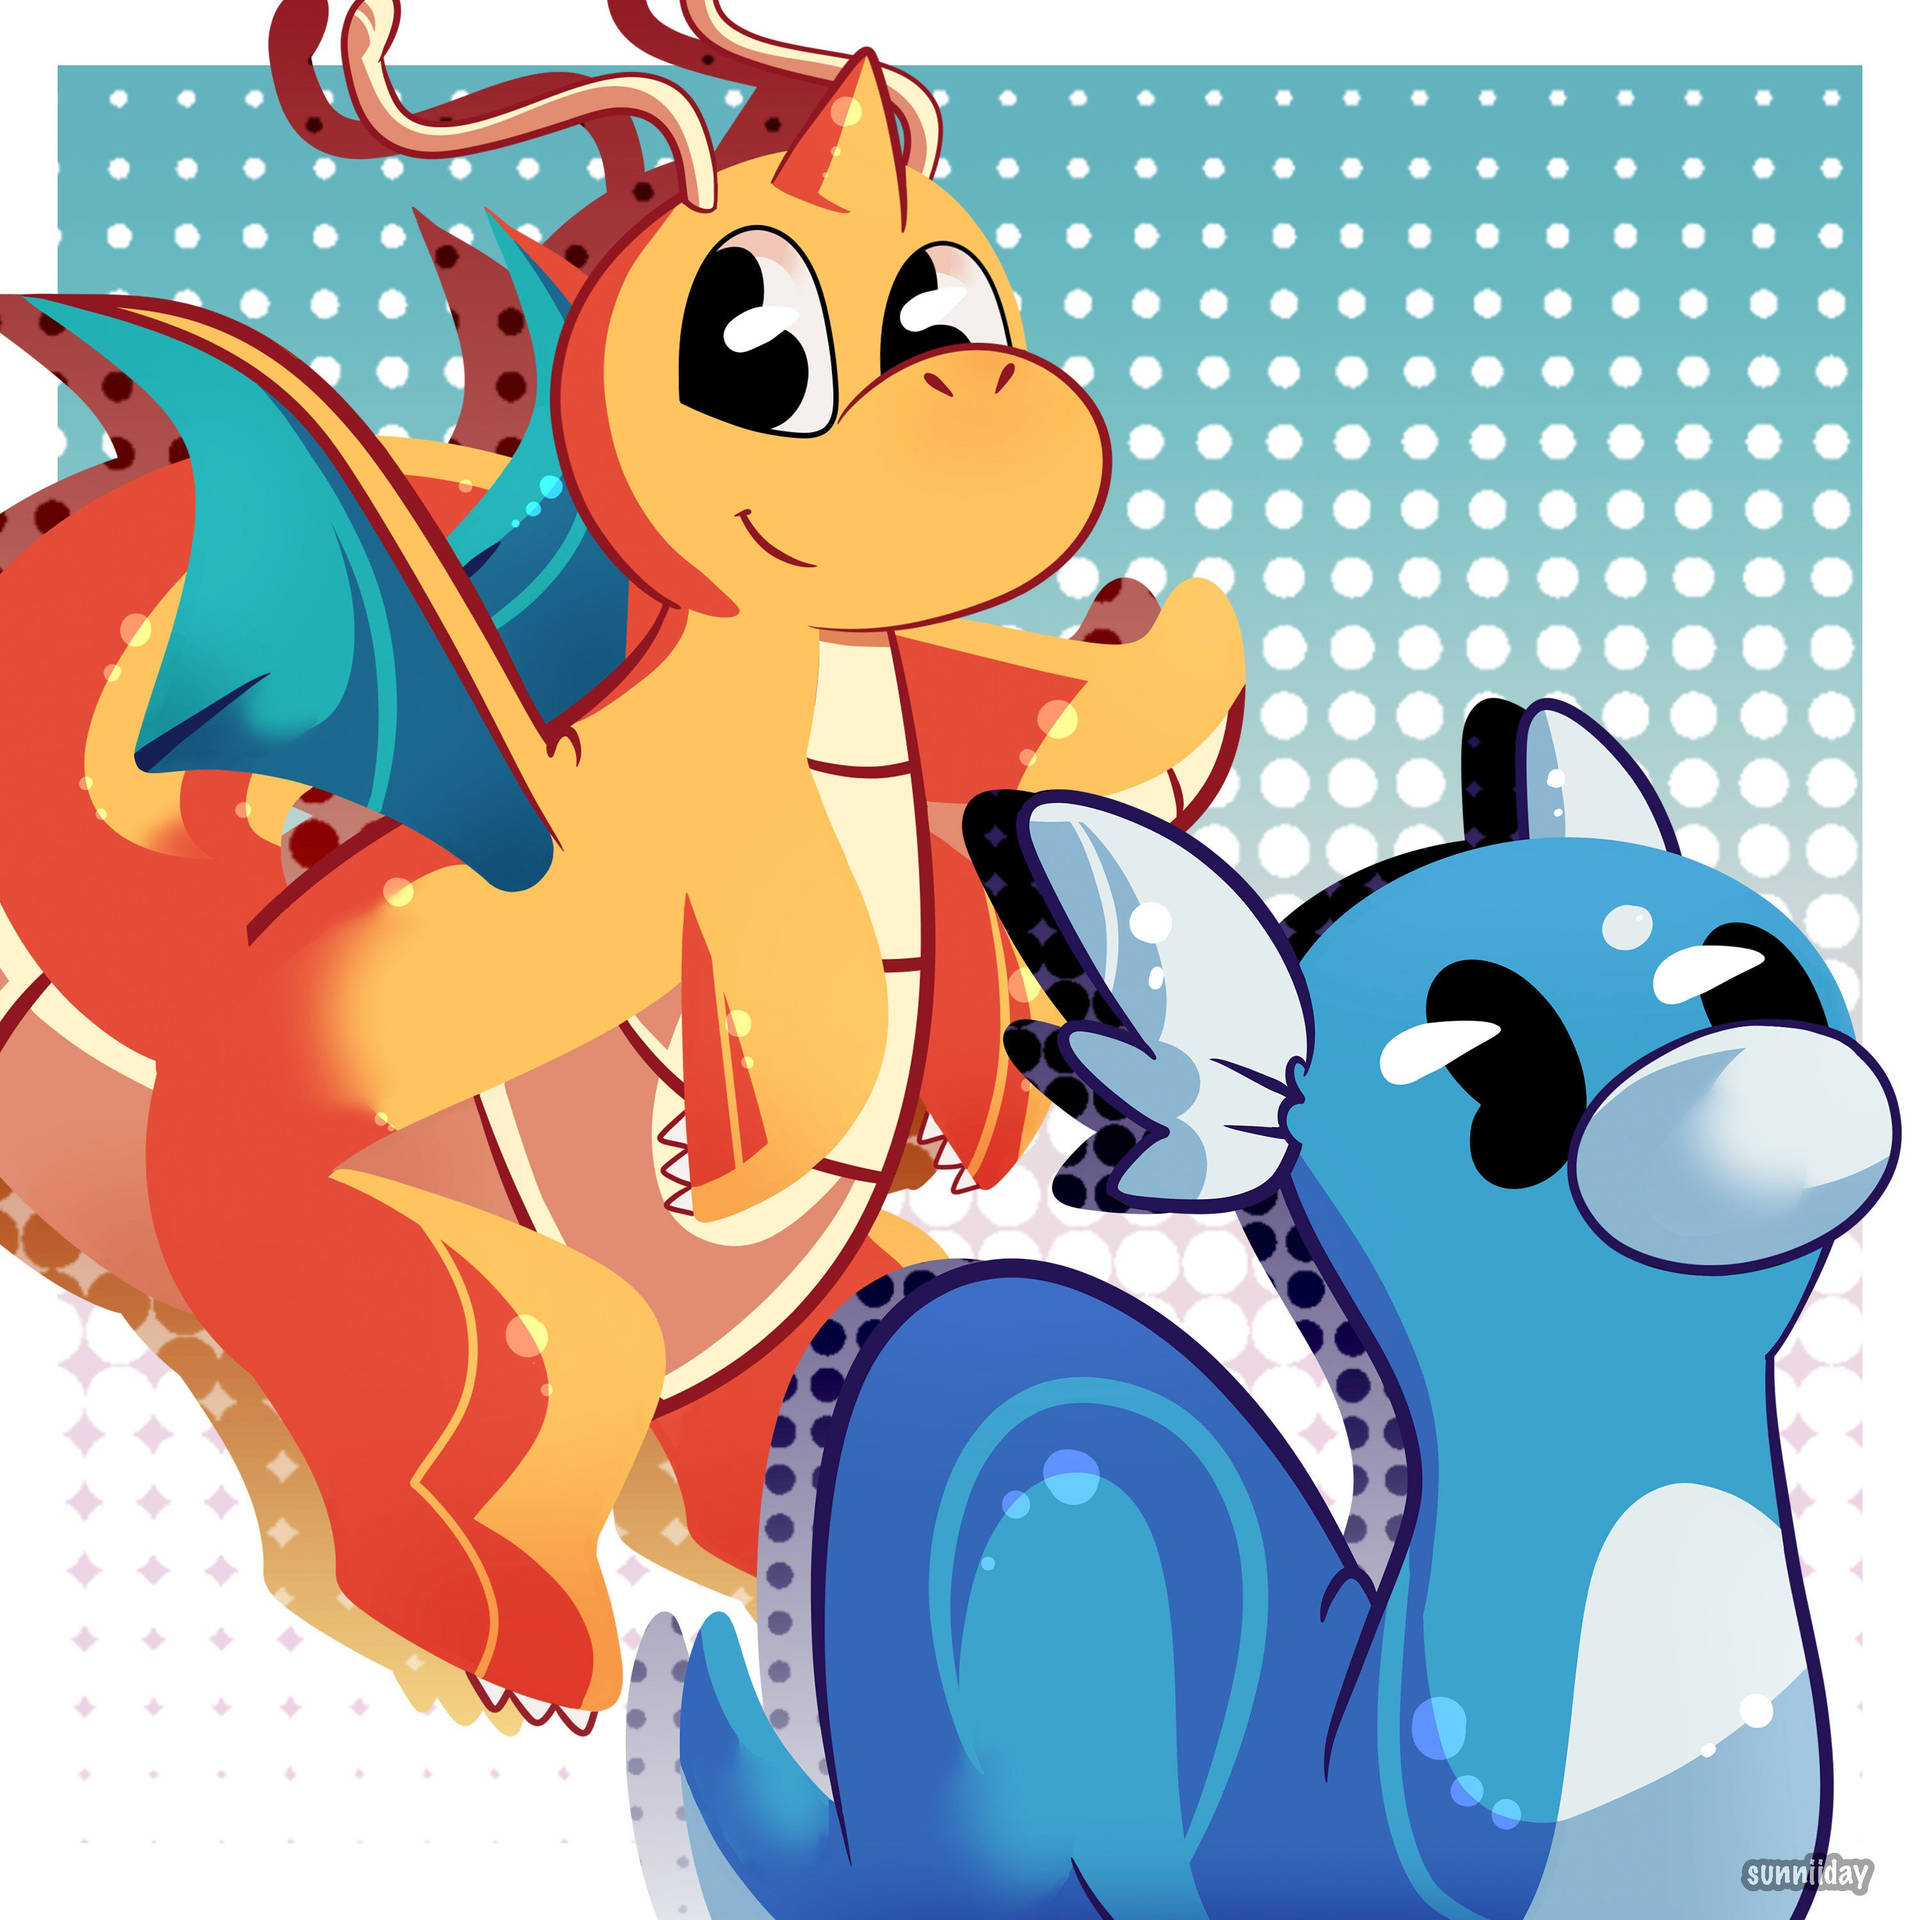 Flying side by side, Dragonite and Dratini grace the skies. Wallpaper